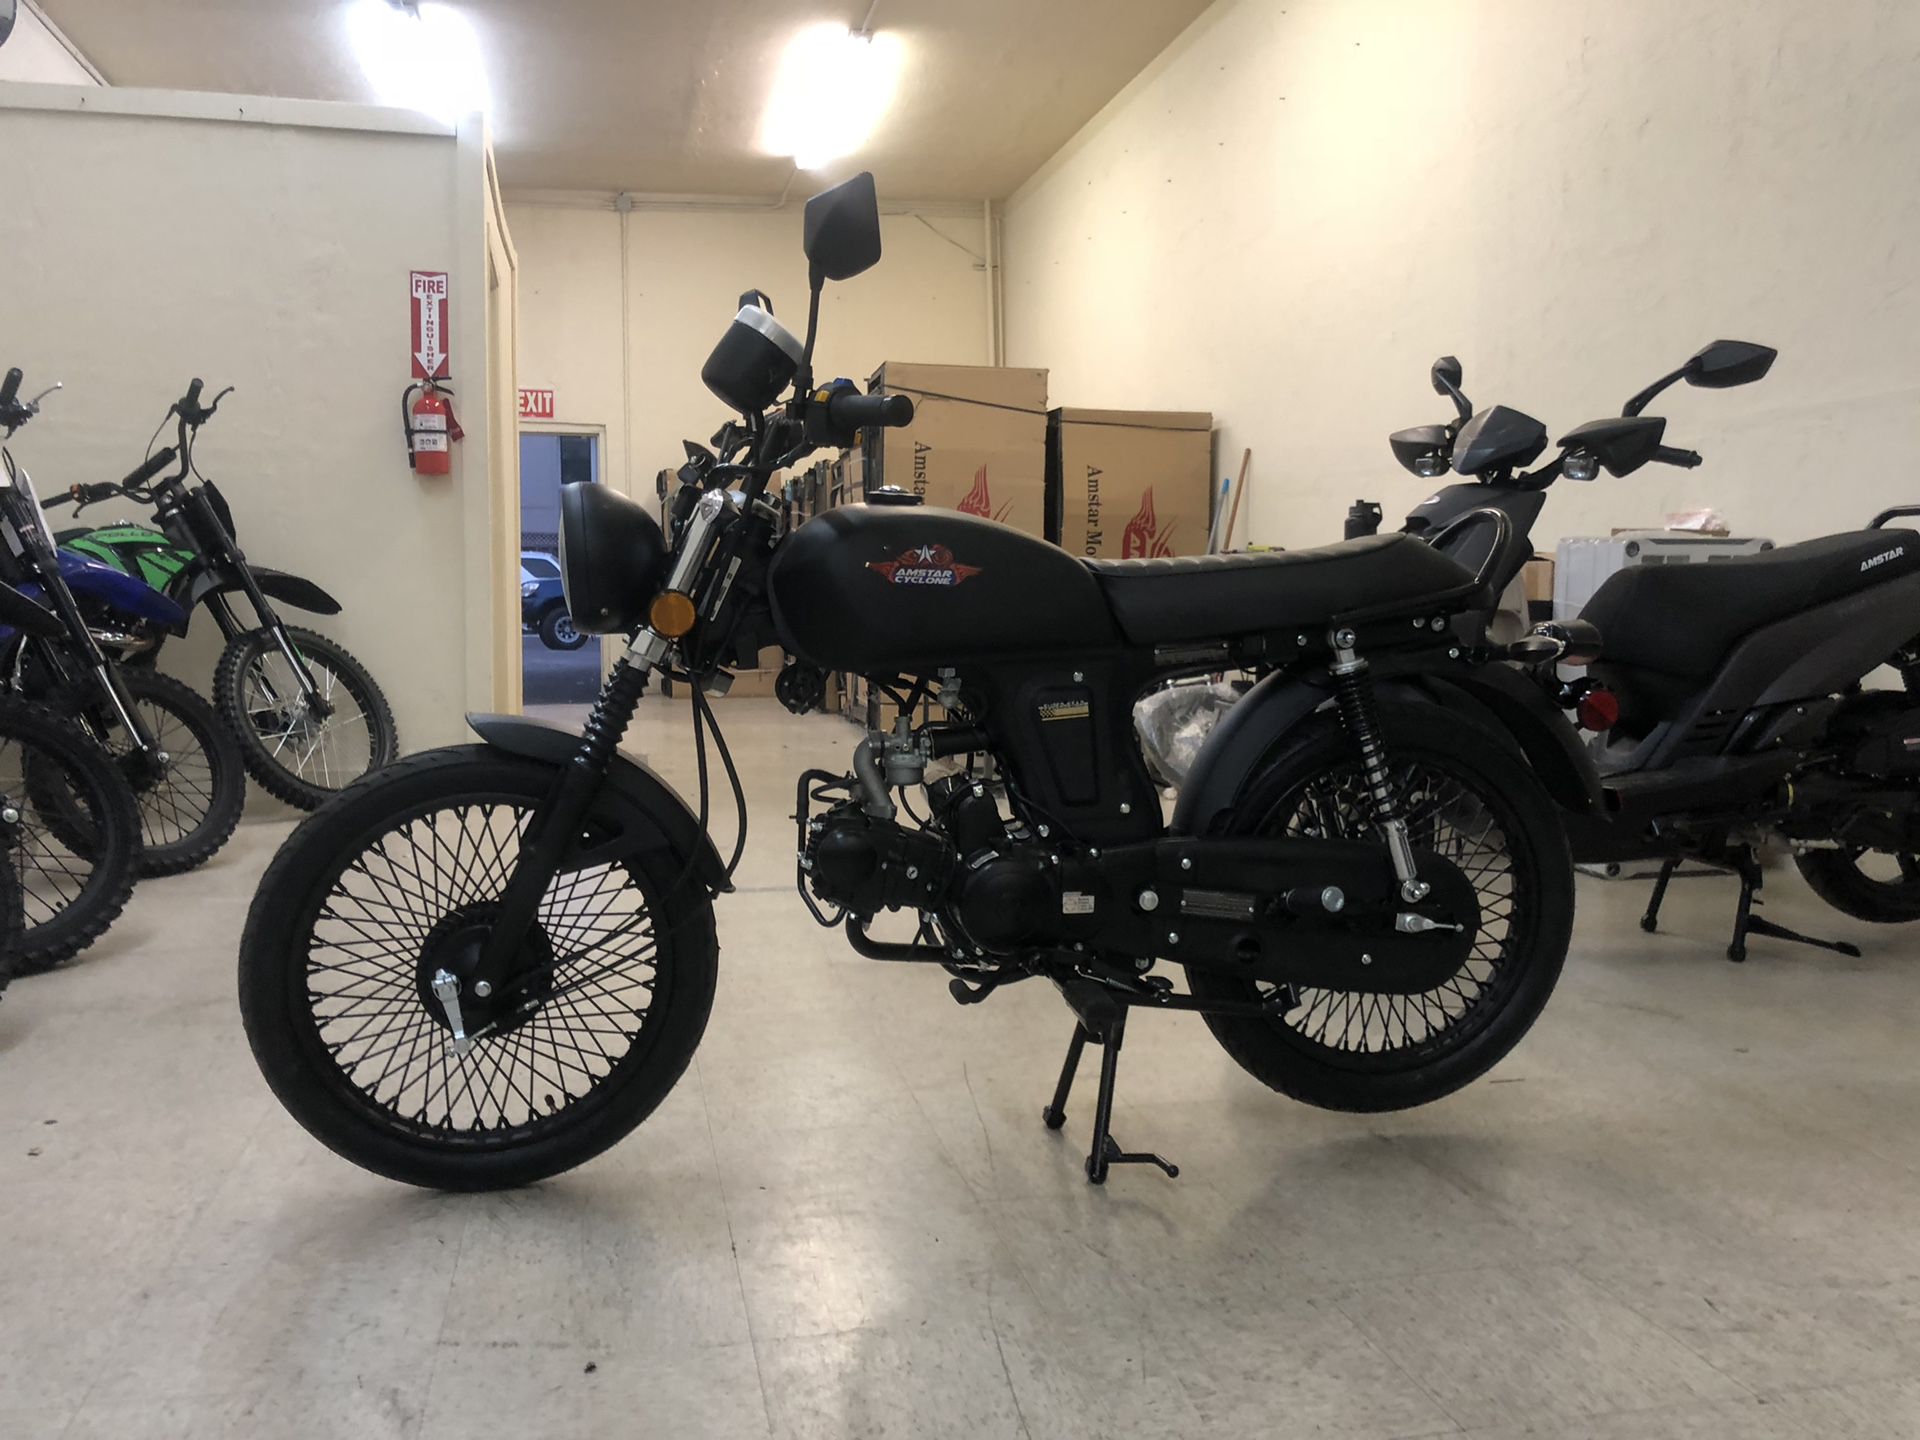 Borgerskab Baby økologisk Classic style 49cc Motorcycle Street Legal Café racer new for Sale in  Richmond, CA - OfferUp